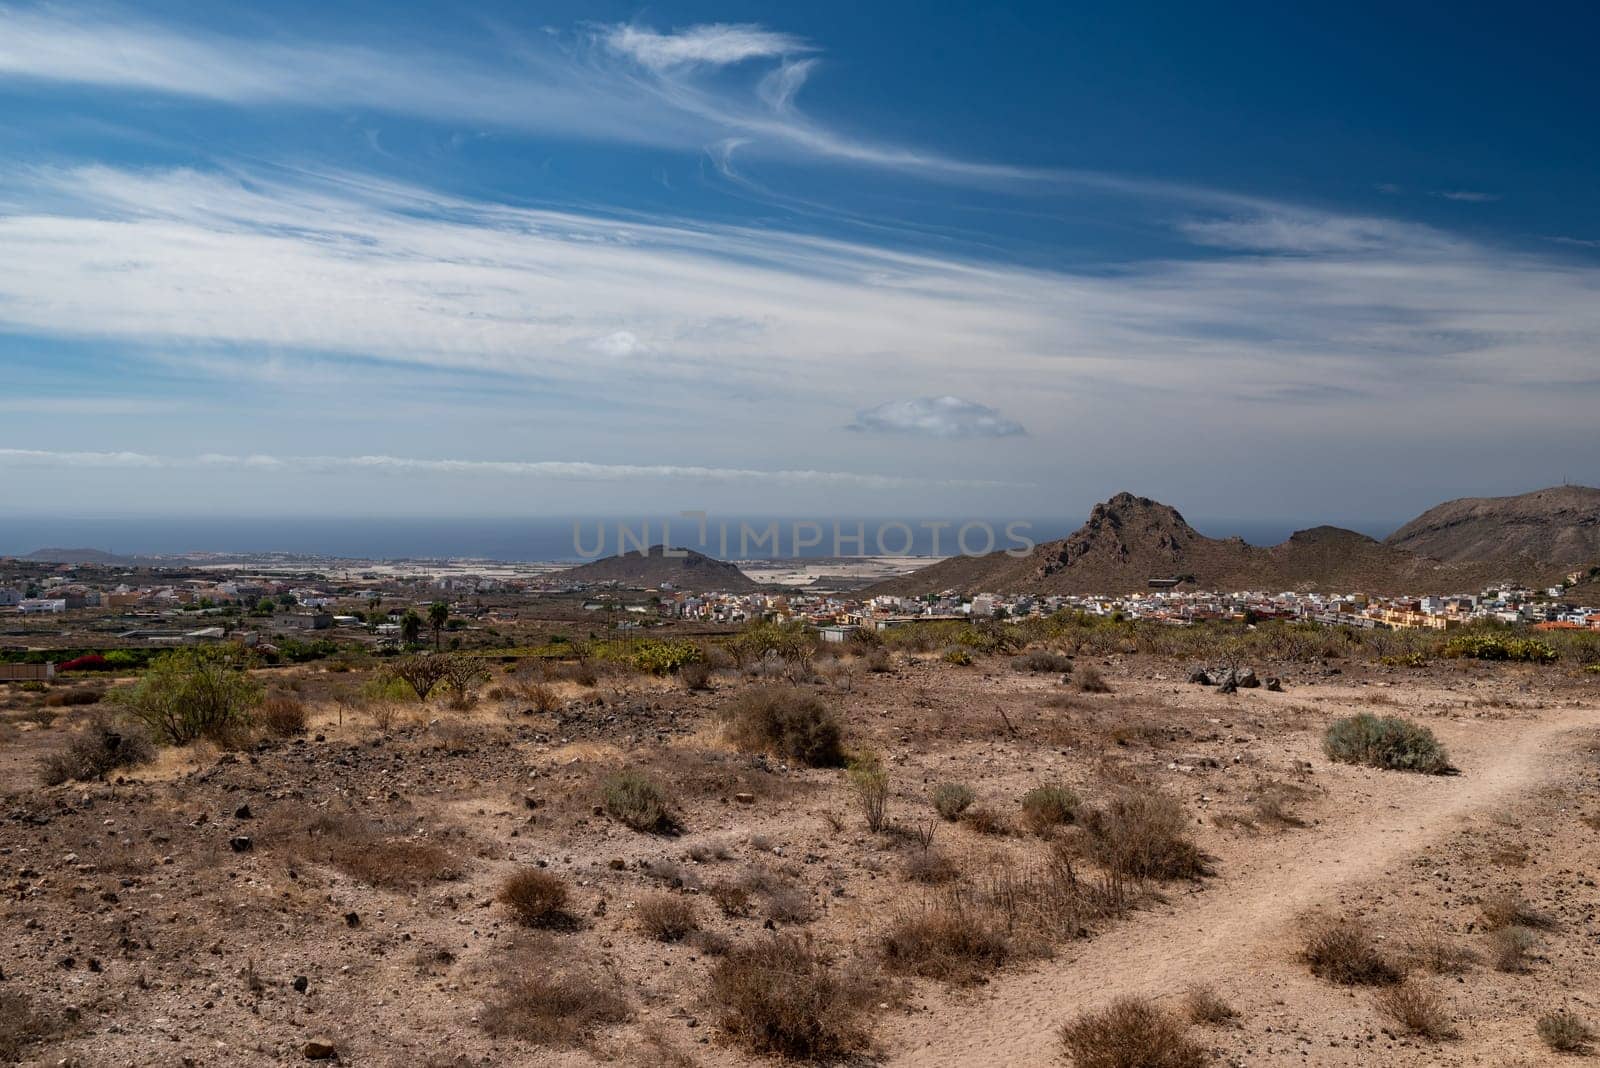 Hiking trail in a desert with a view of a city, sea or ocean and mountains by amovitania